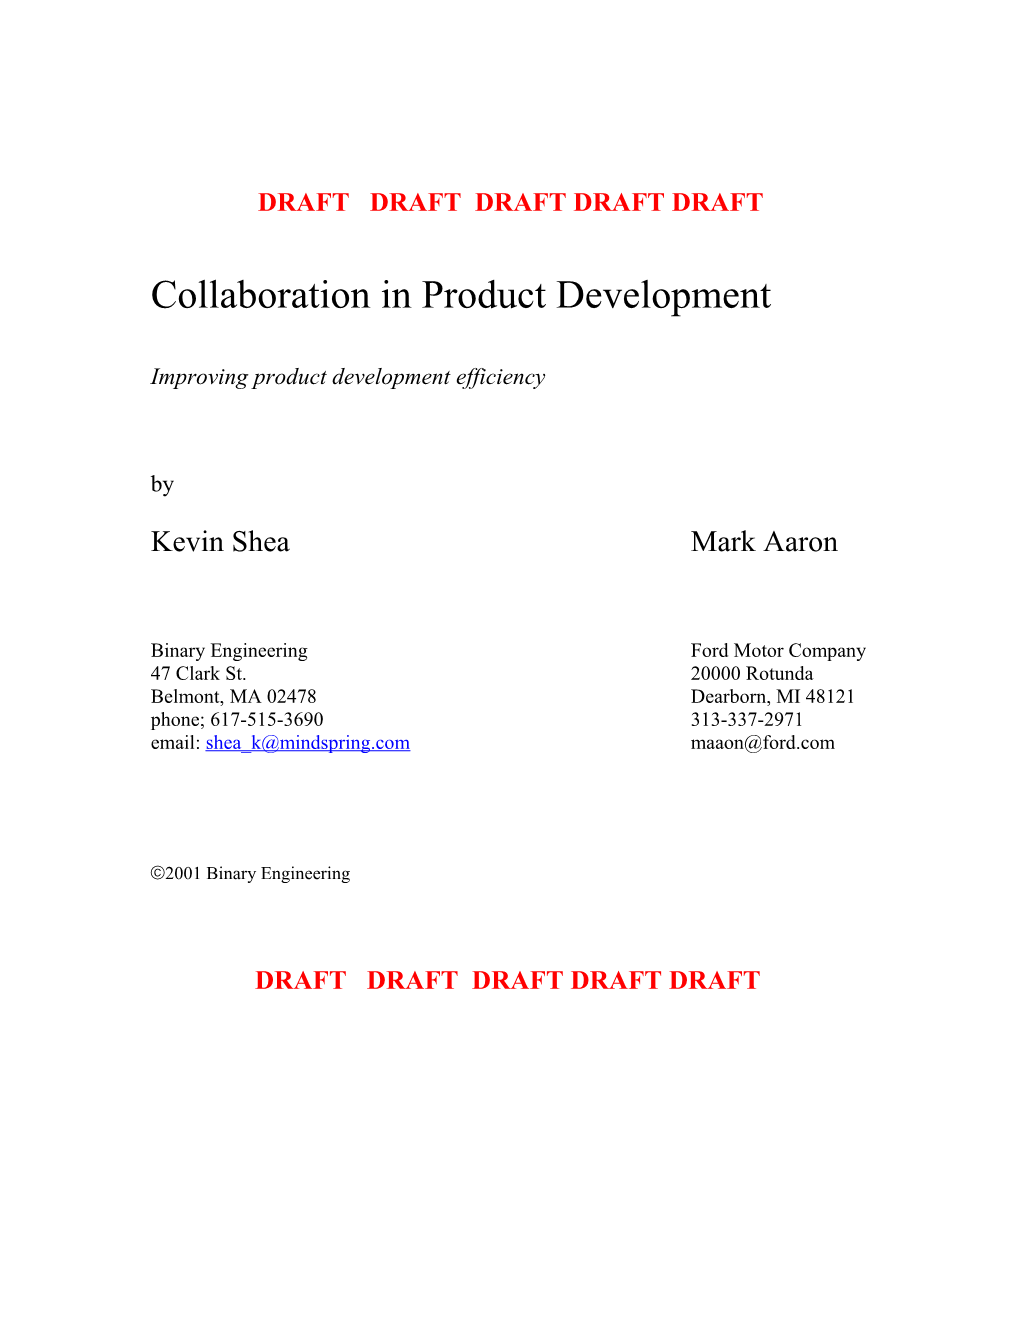 Collaboration in Product Development